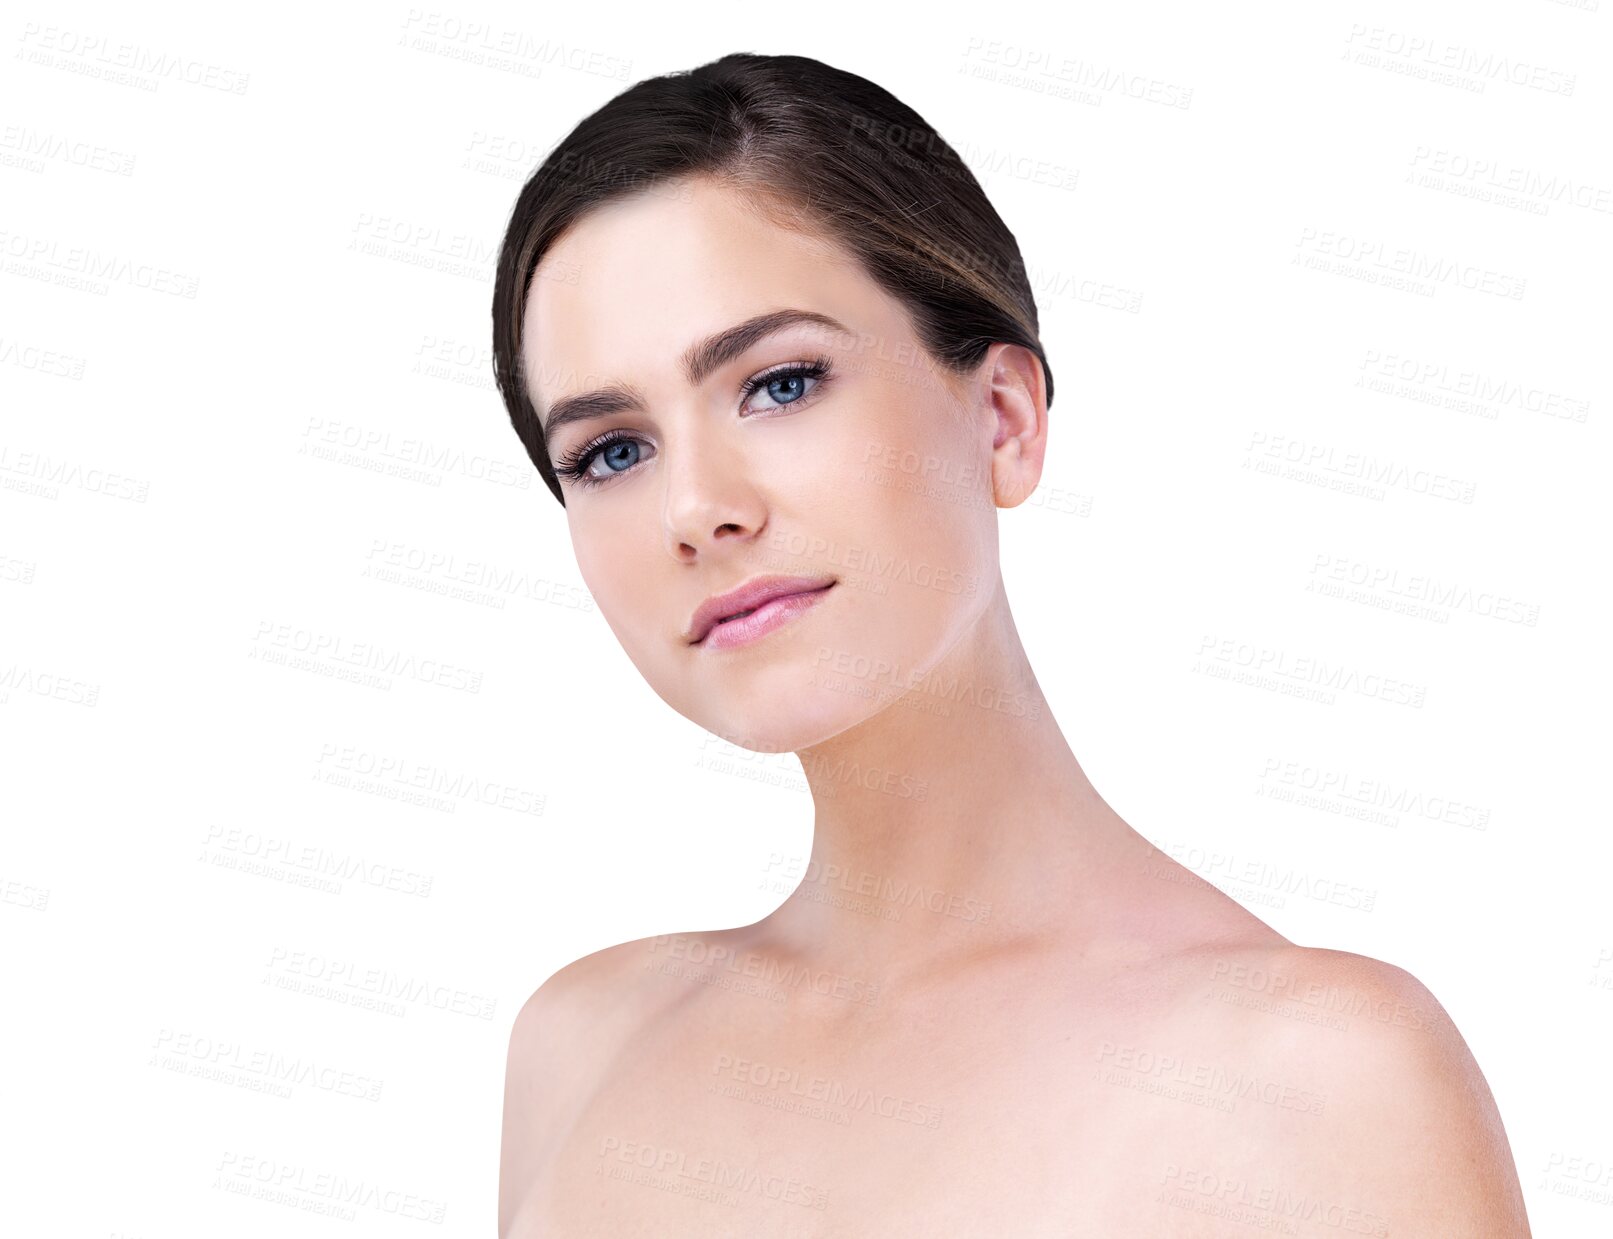 Buy stock photo Beauty, skincare and portrait of woman with cosmetics, confidence and isolated on transparent png background. Dermatology, natural makeup and face of girl with skin glow, wellness and healthy facial.